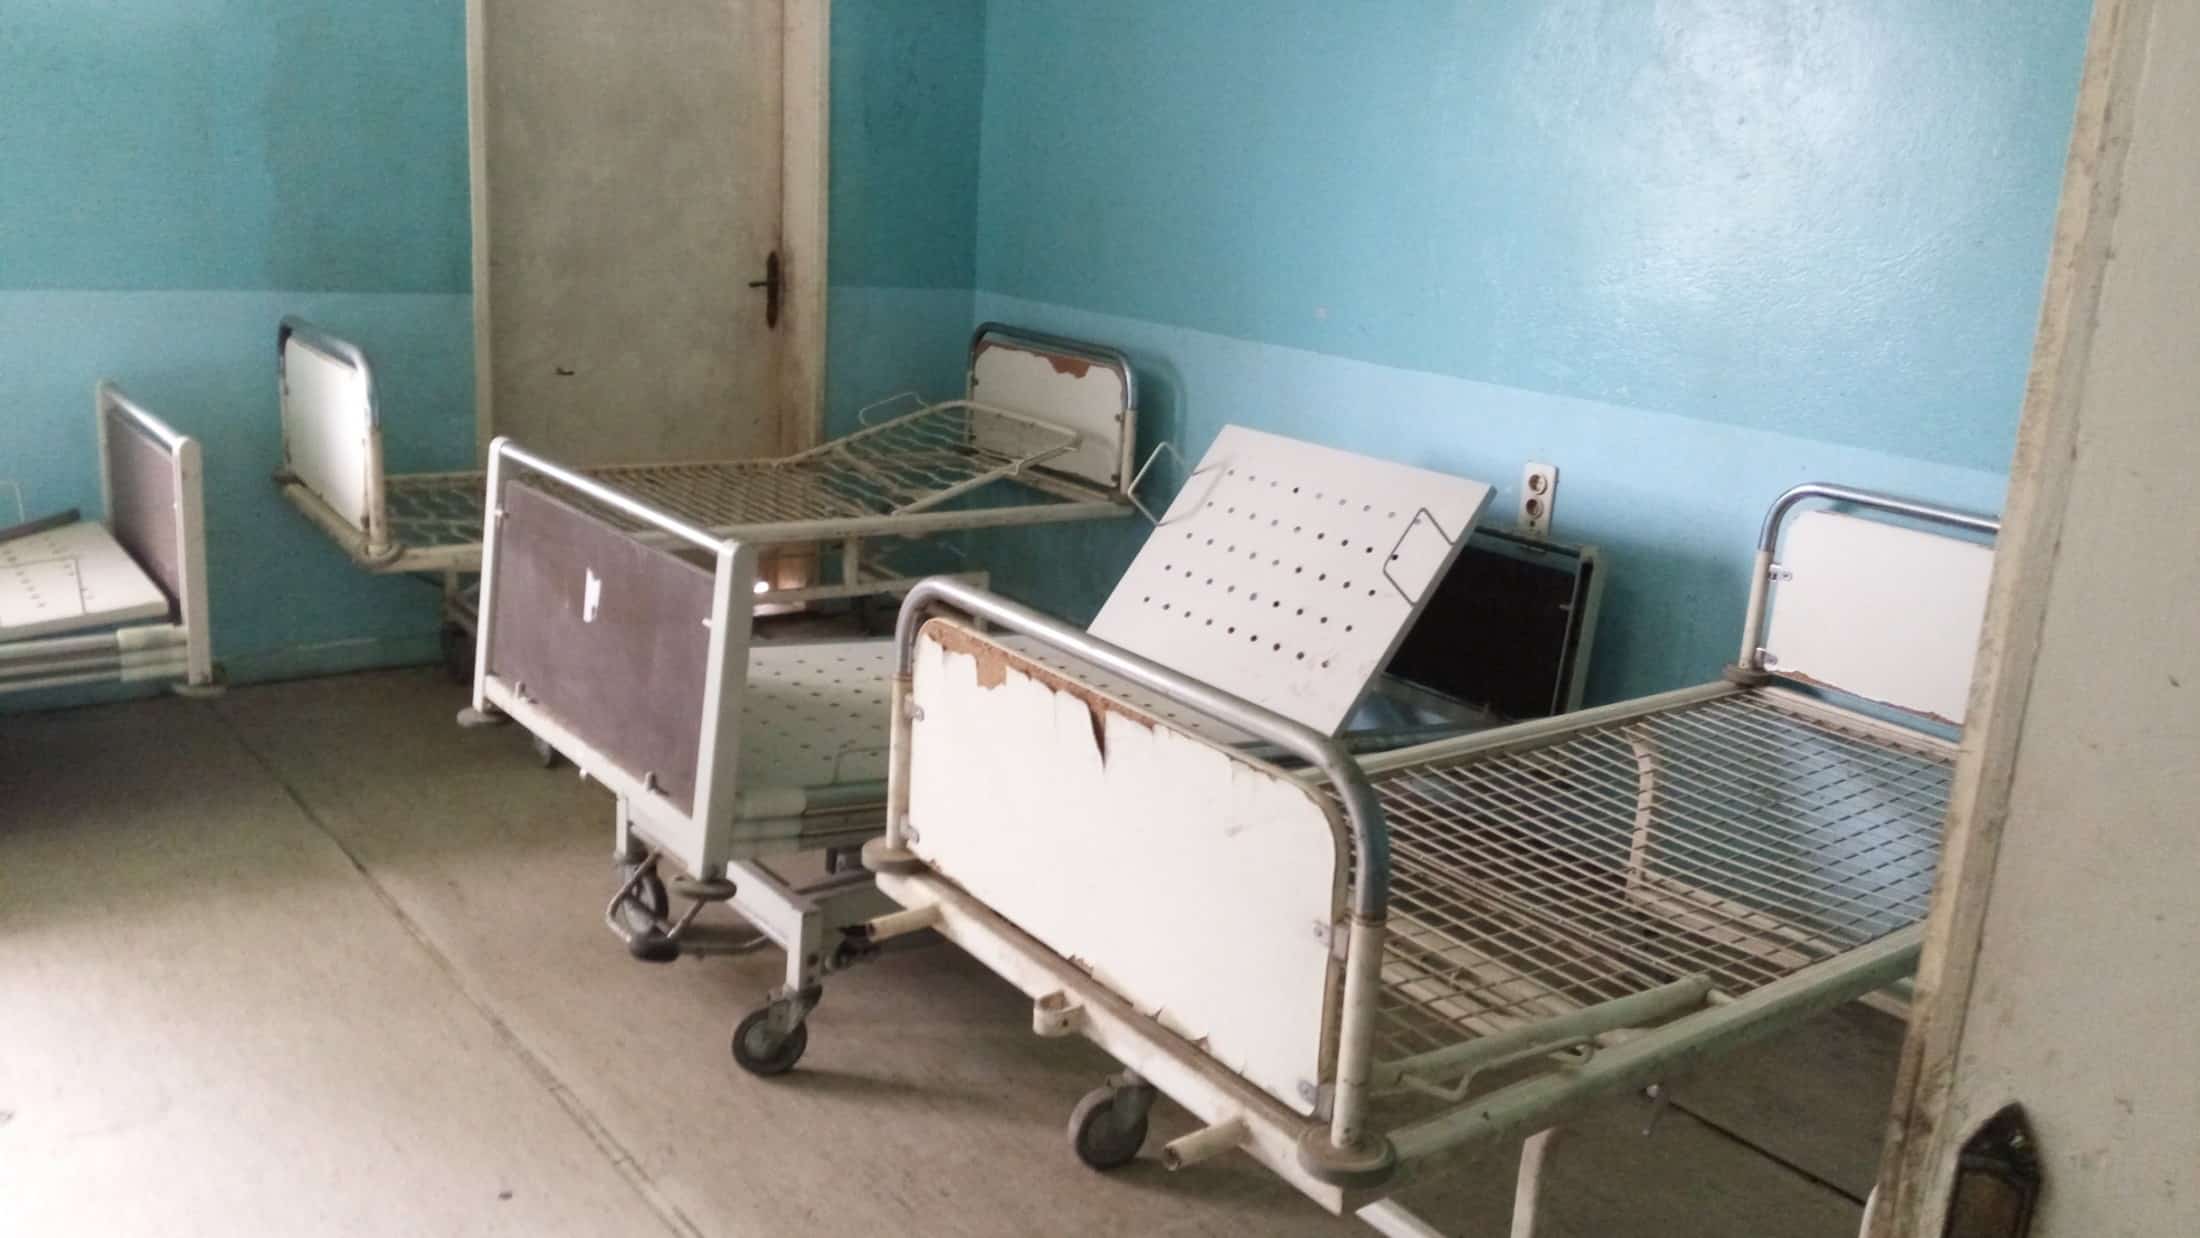 Empty metal beds in a hospital room.